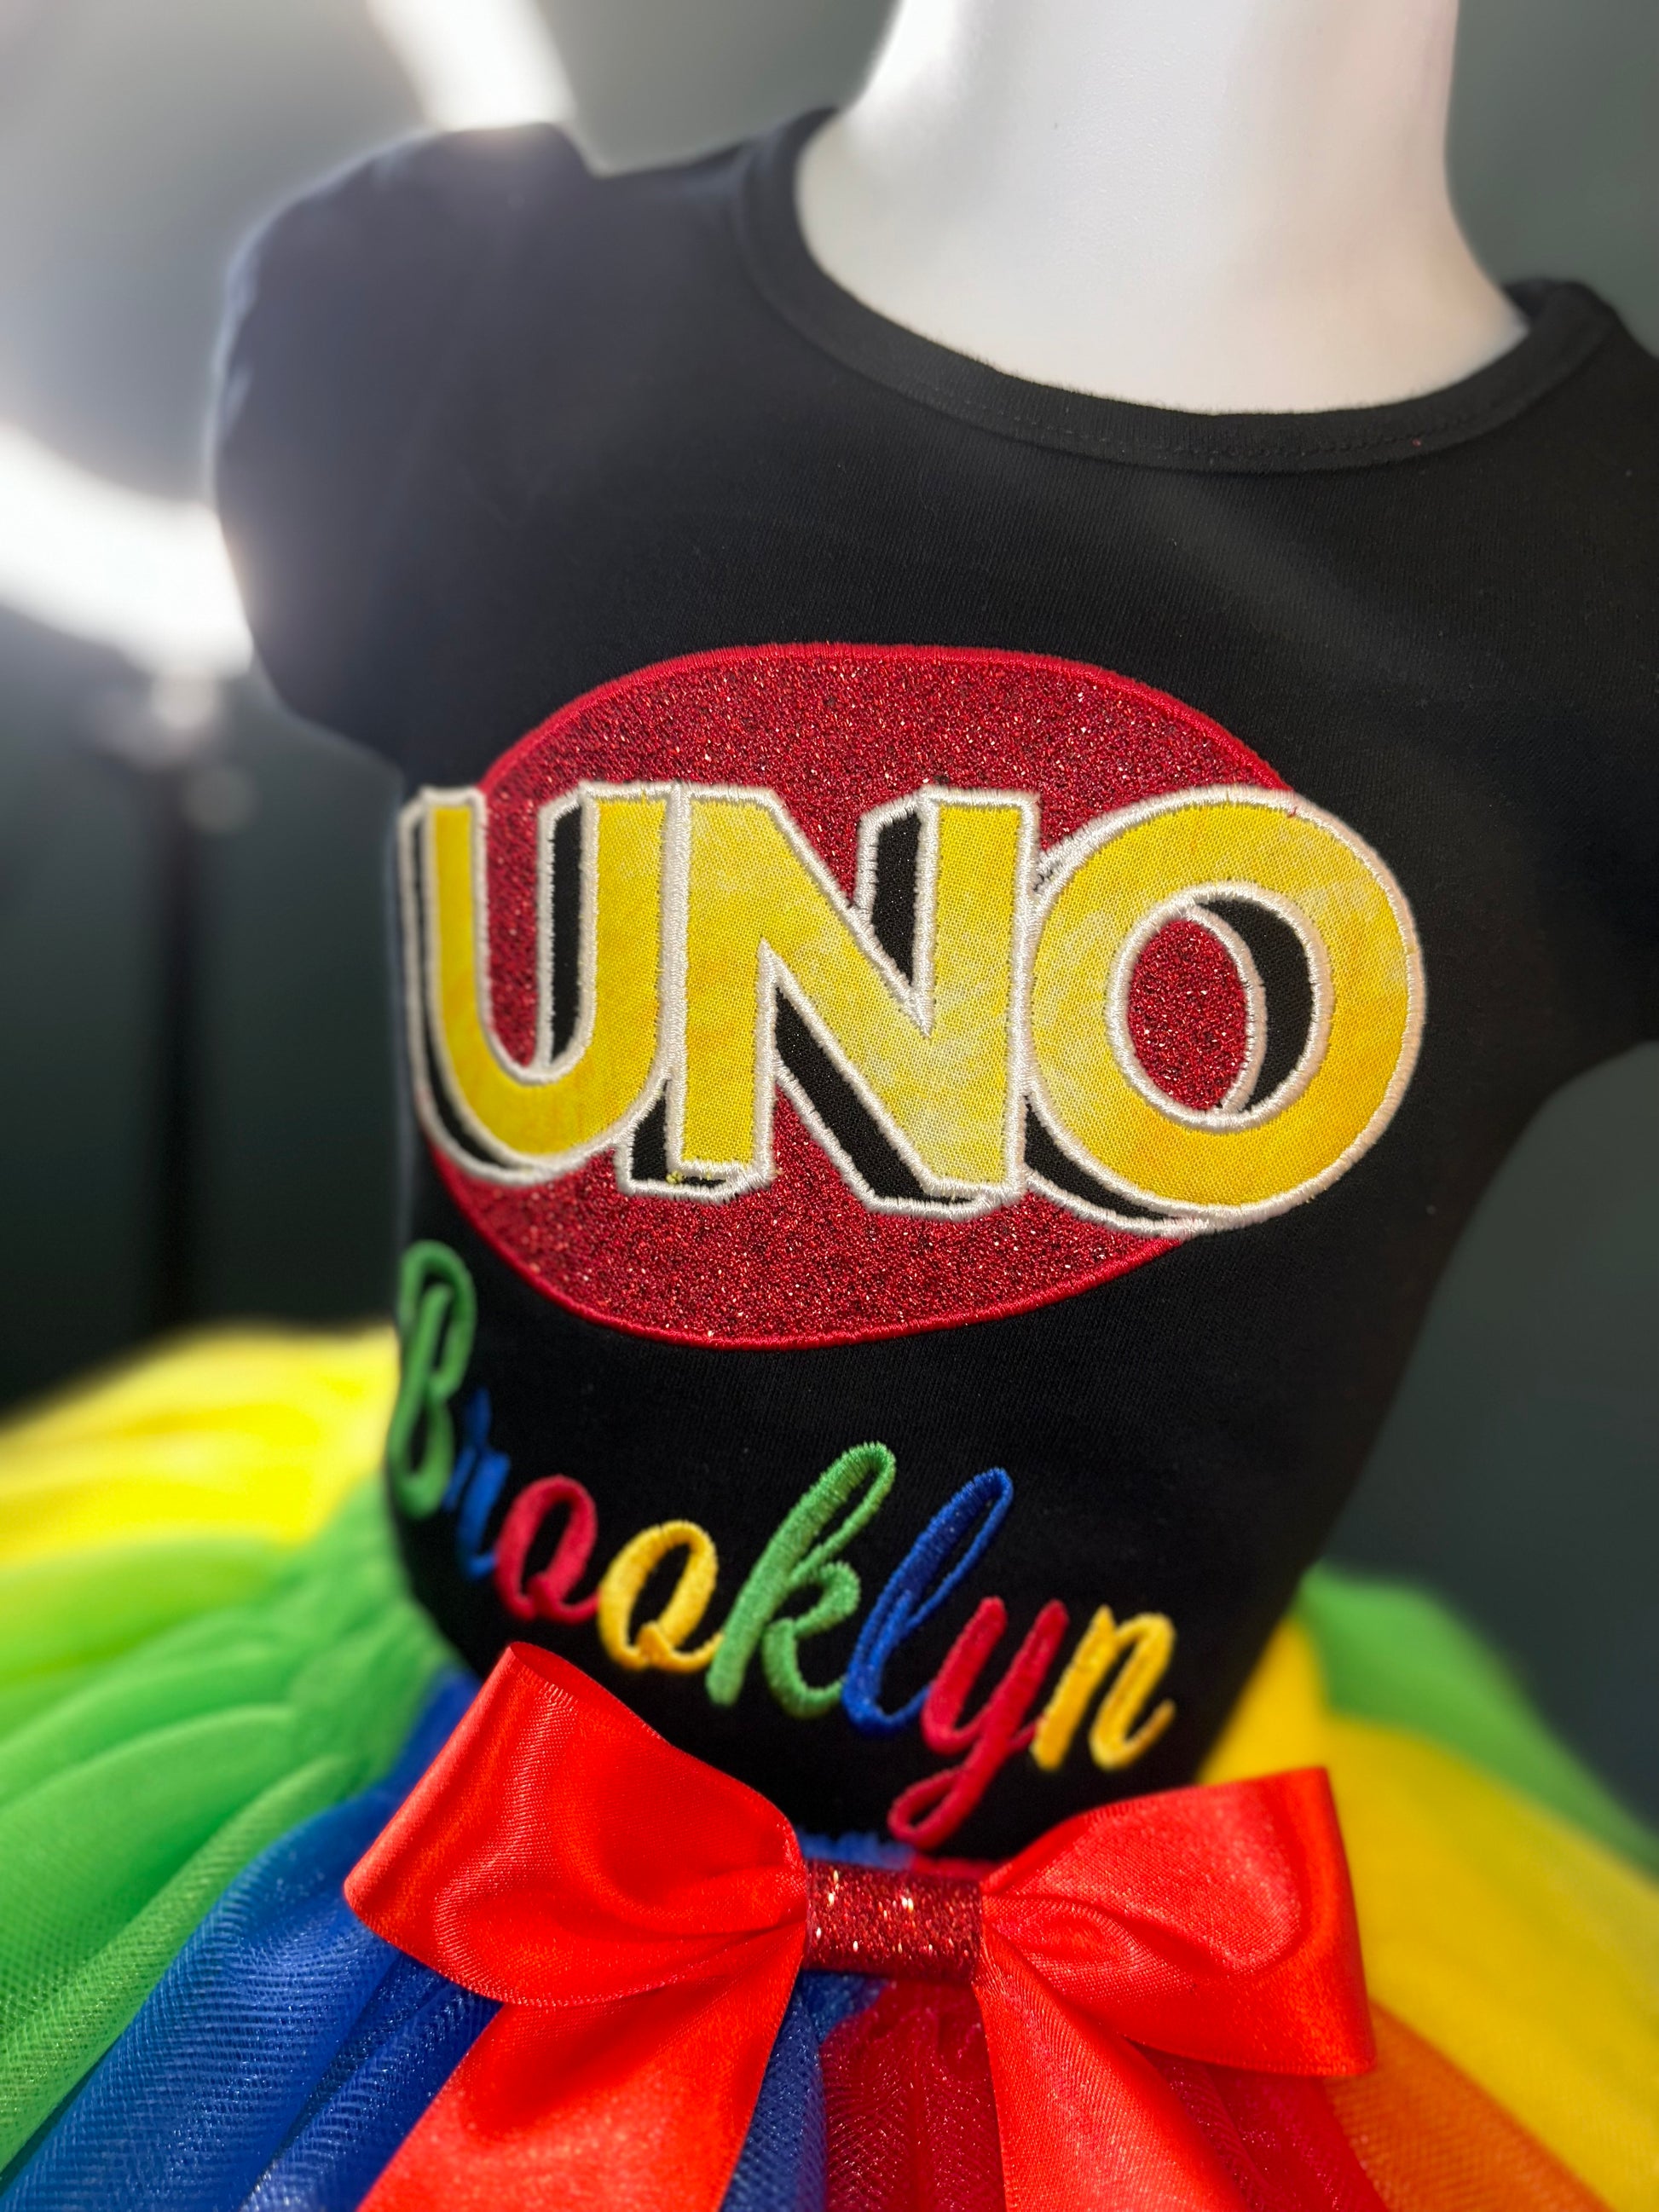 uno birthday outfit for girls. 1st birthday theme and ideas